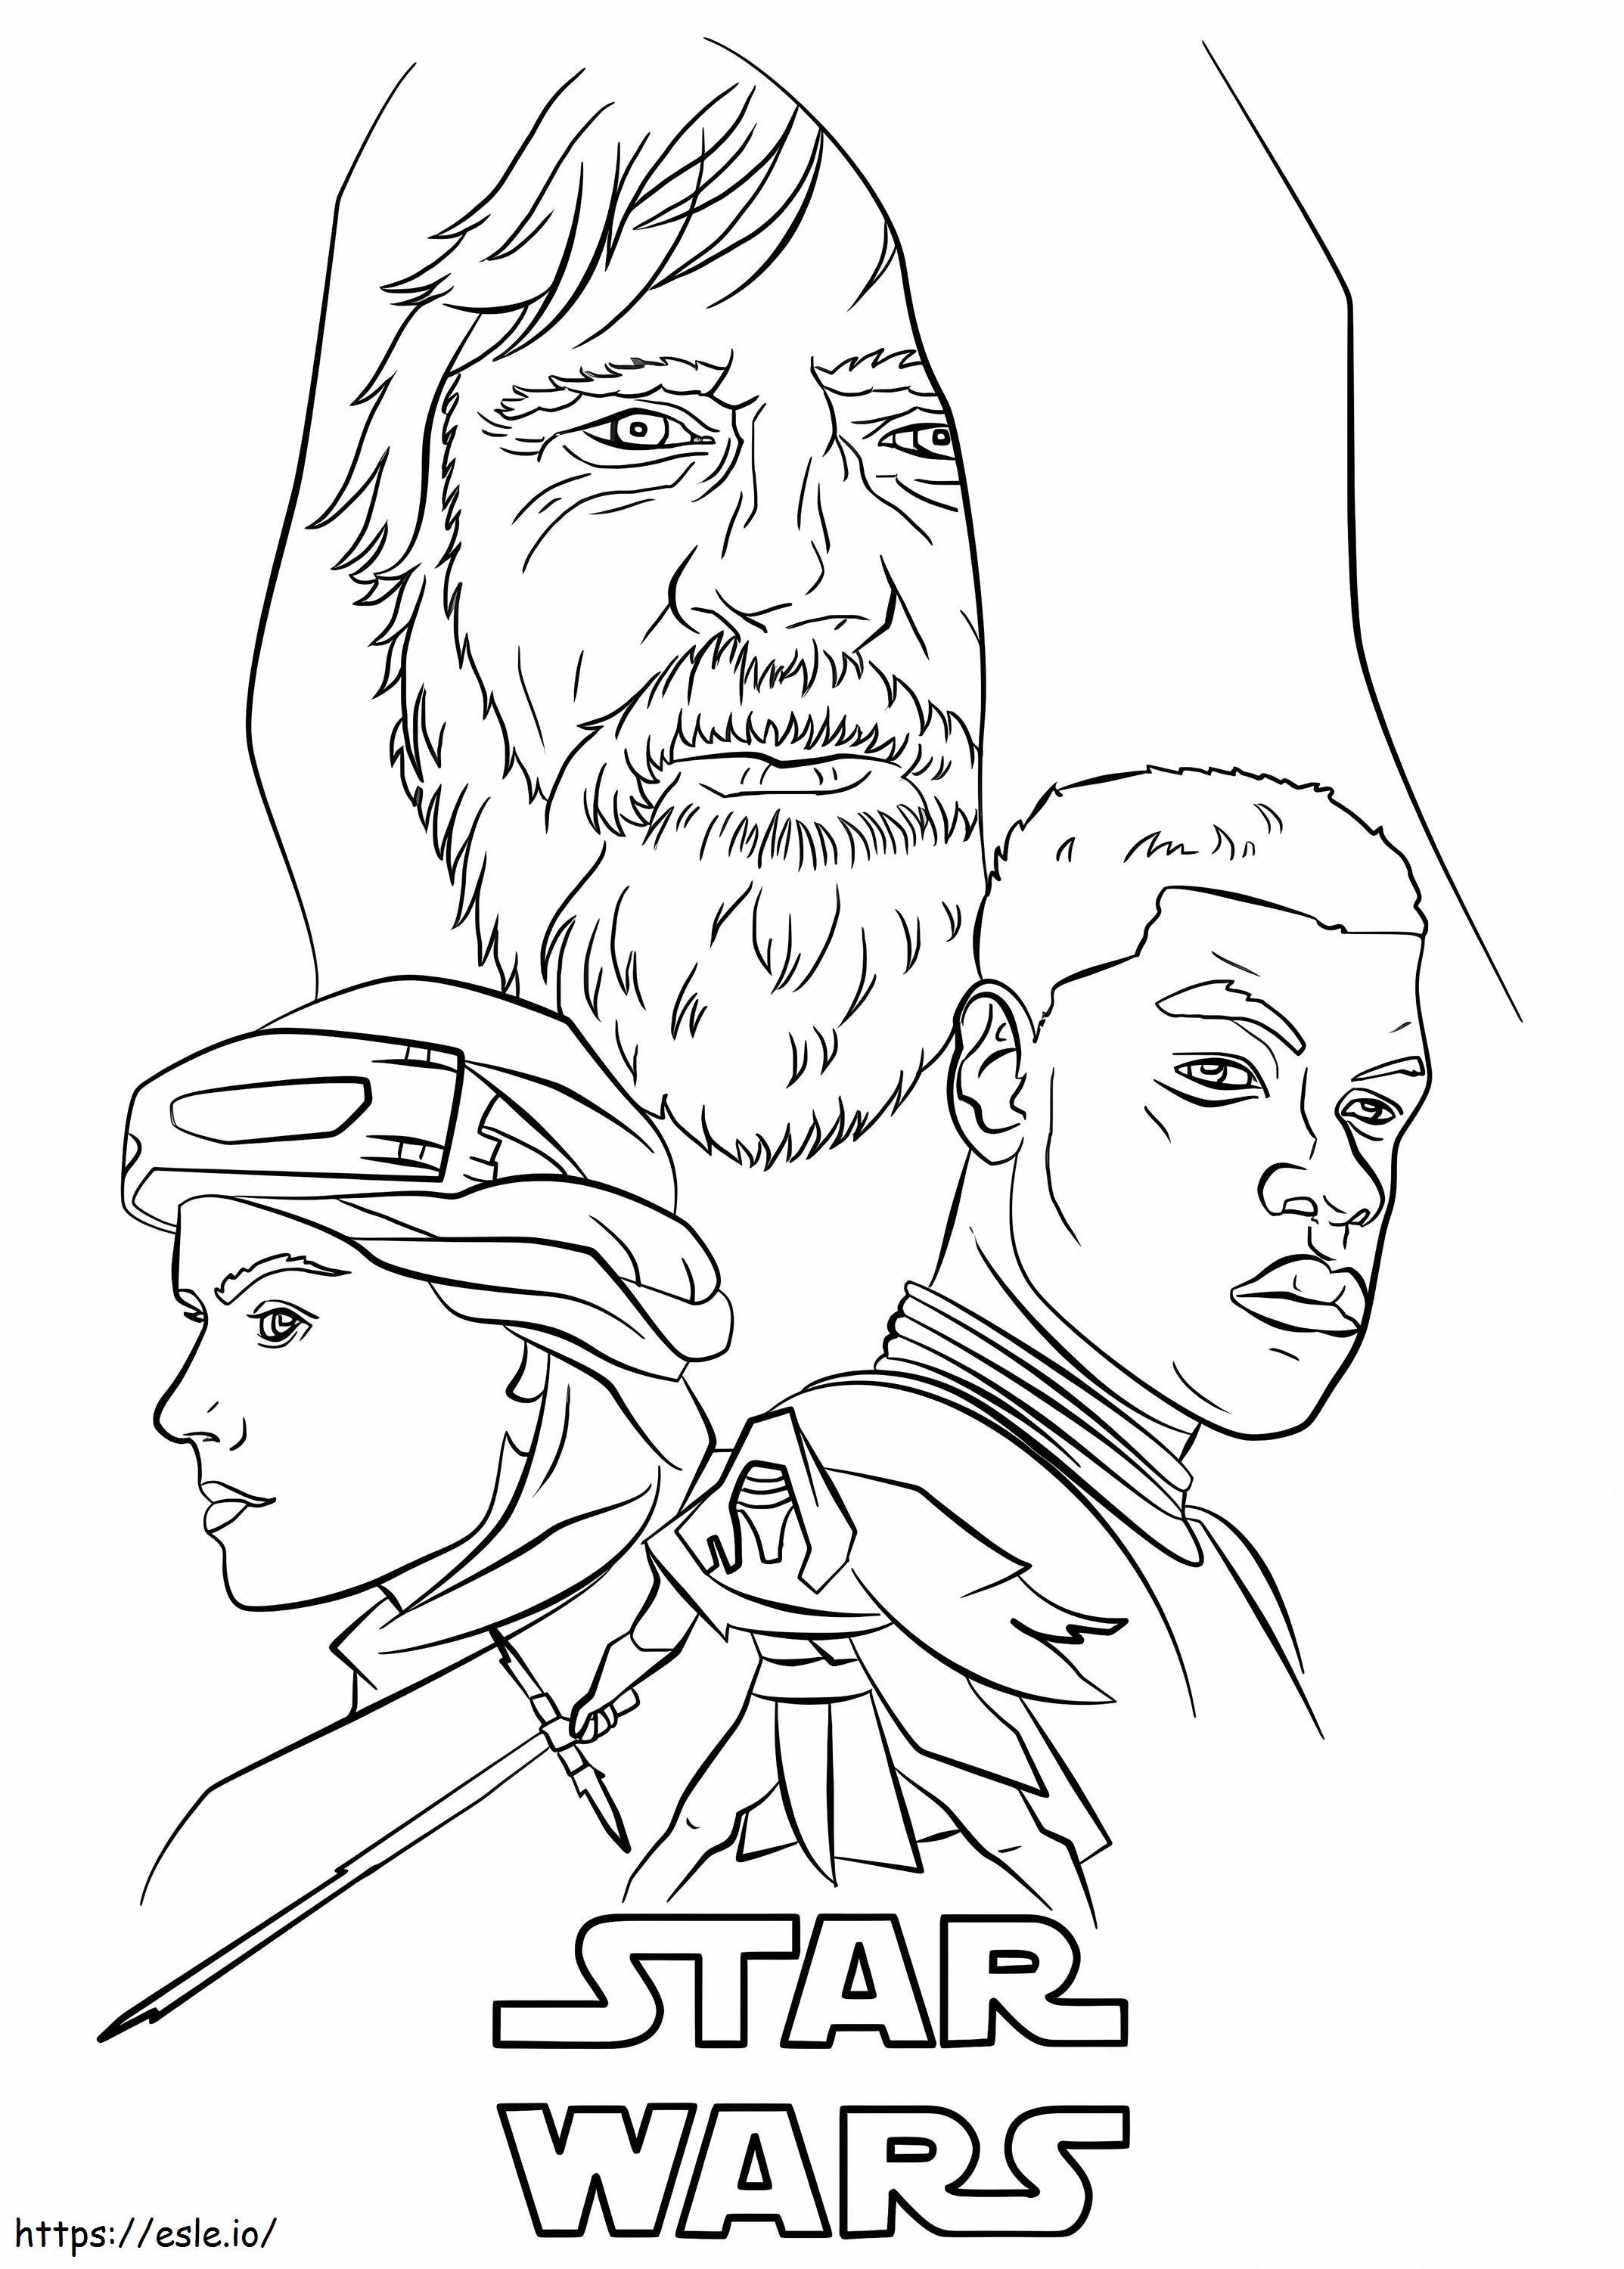 Star Wars The Force Awakens coloring page